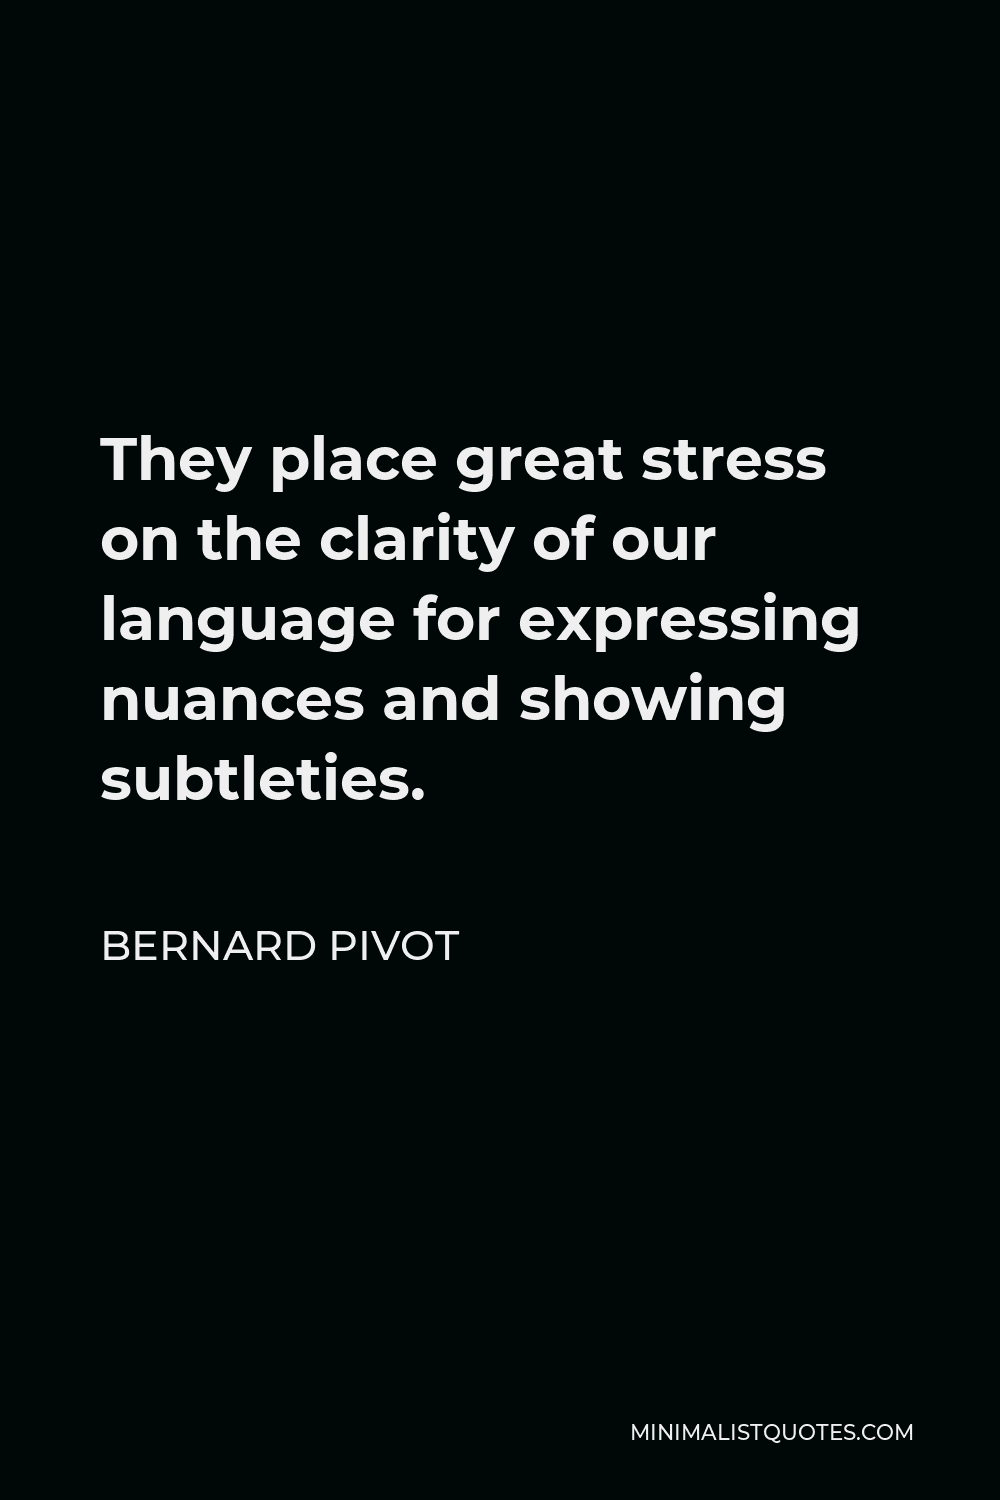 Bernard Pivot Quote - They place great stress on the clarity of our language for expressing nuances and showing subtleties.